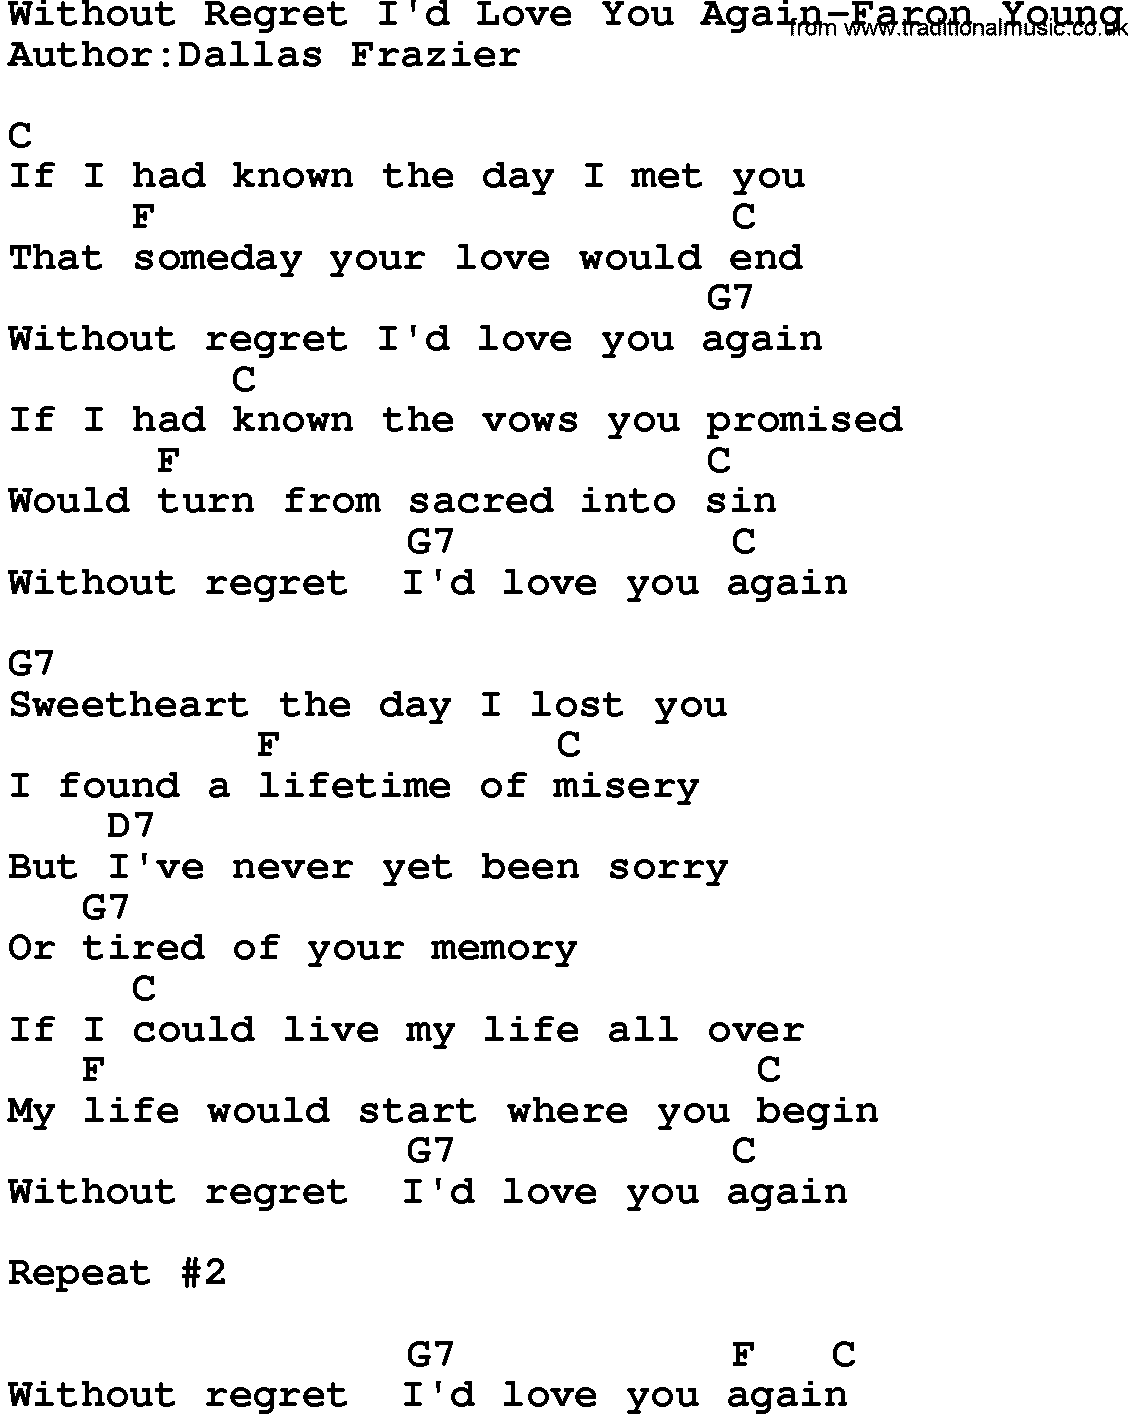 Country music song: Without Regret I'd Love You Again-Faron Young lyrics and chords